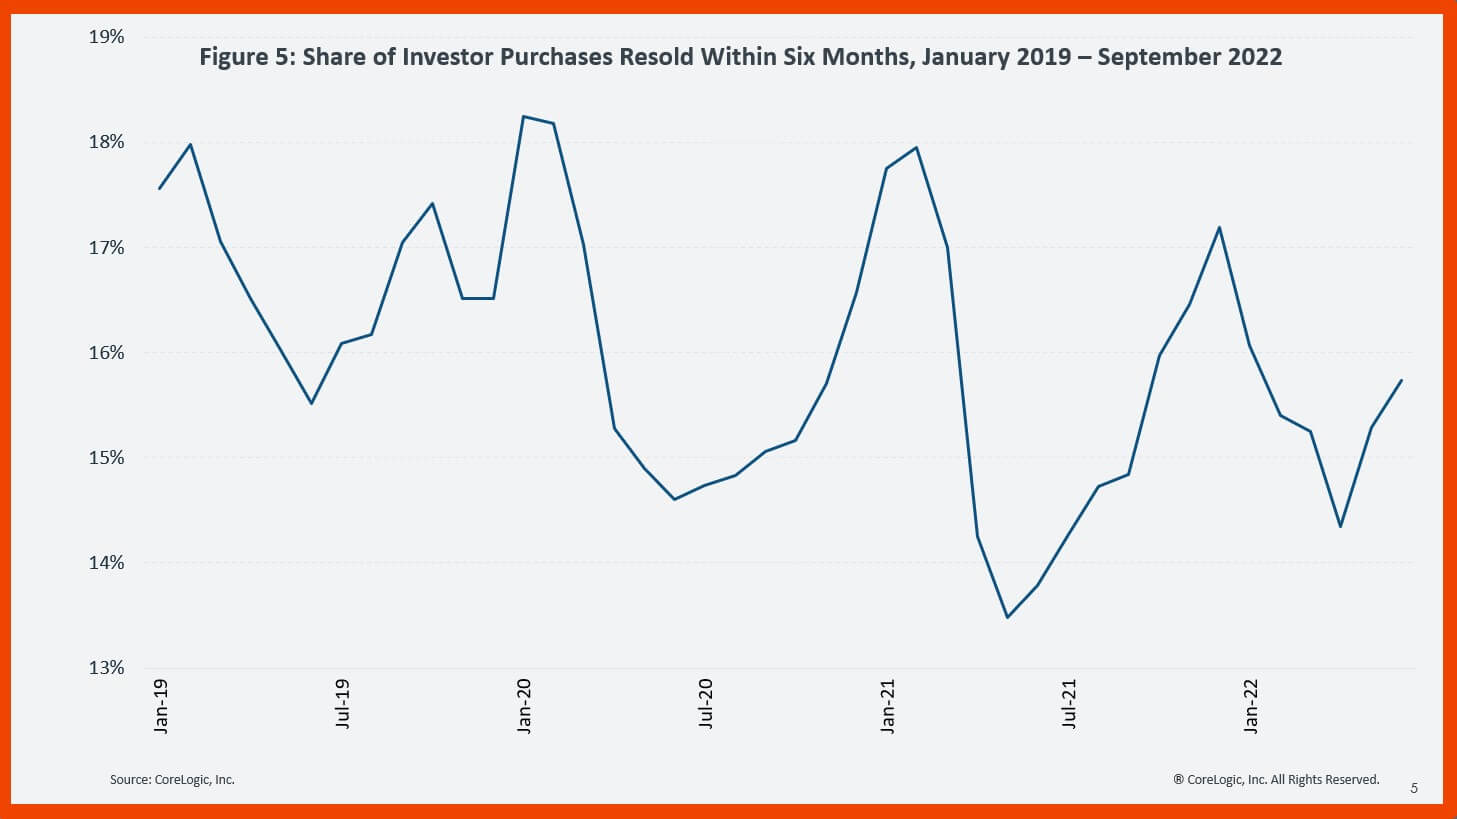 Share of investor home purchases re-sold in six months